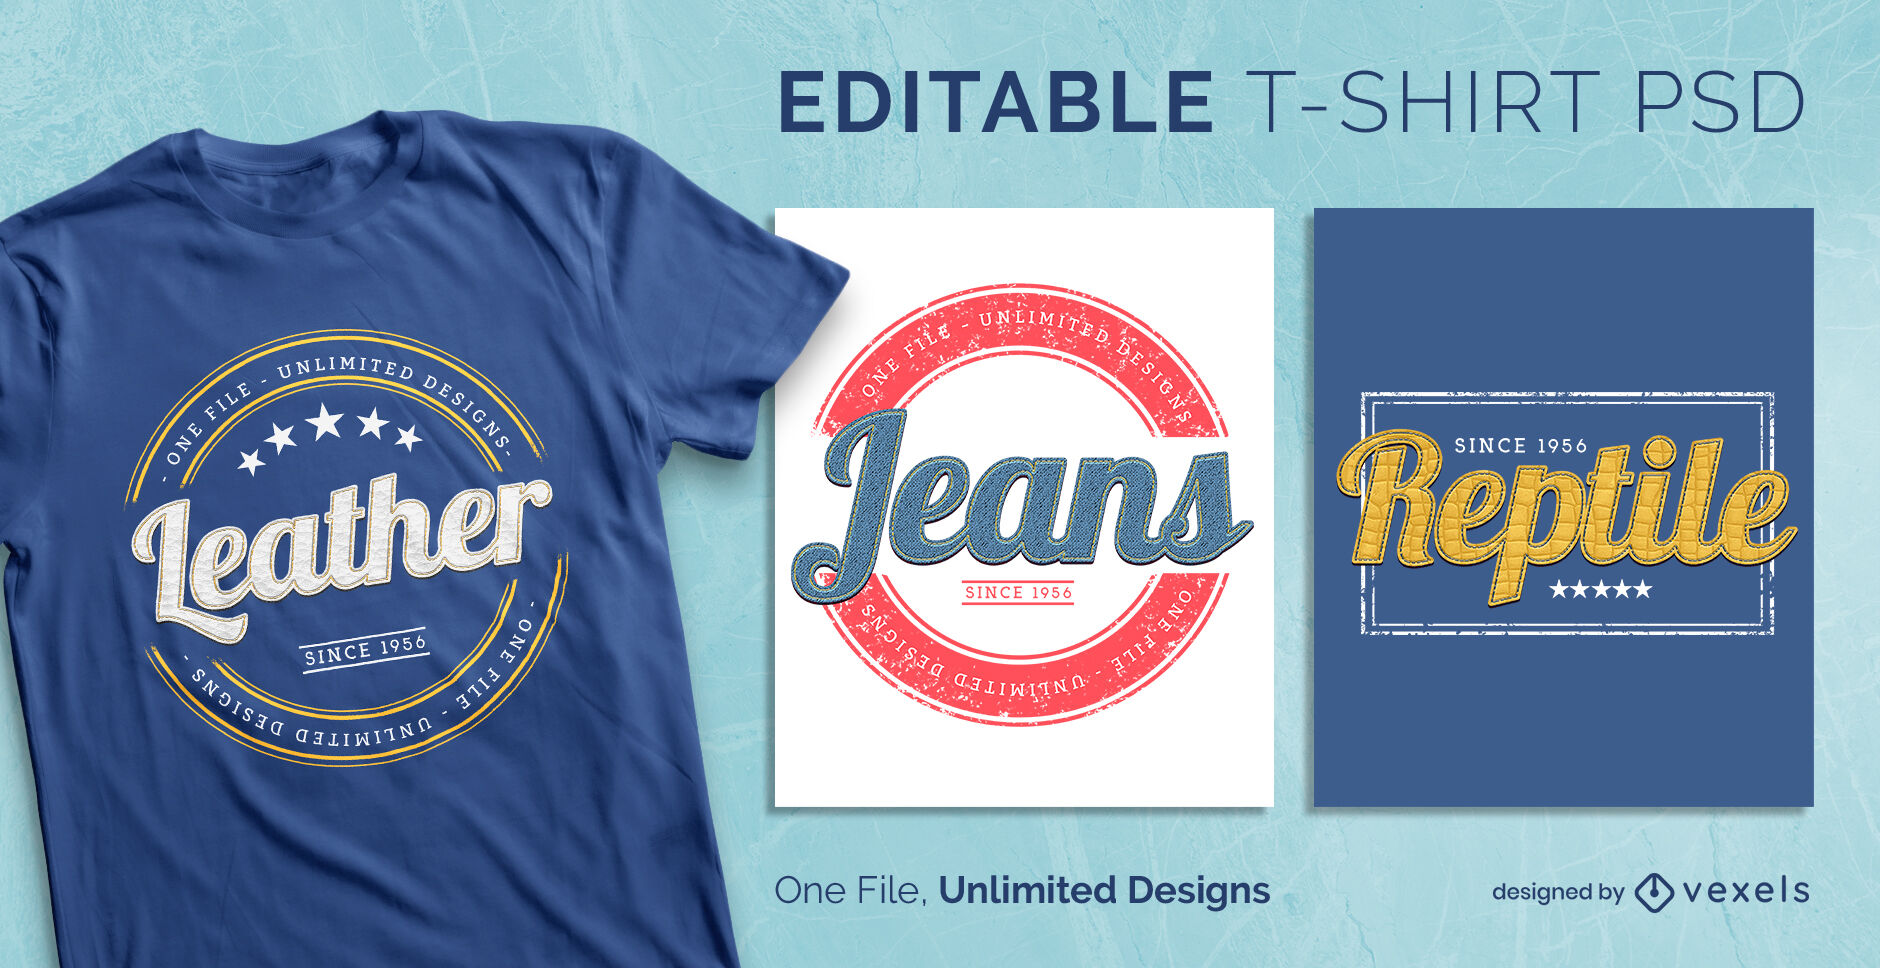 Vintage badges scalable t-shirt psd